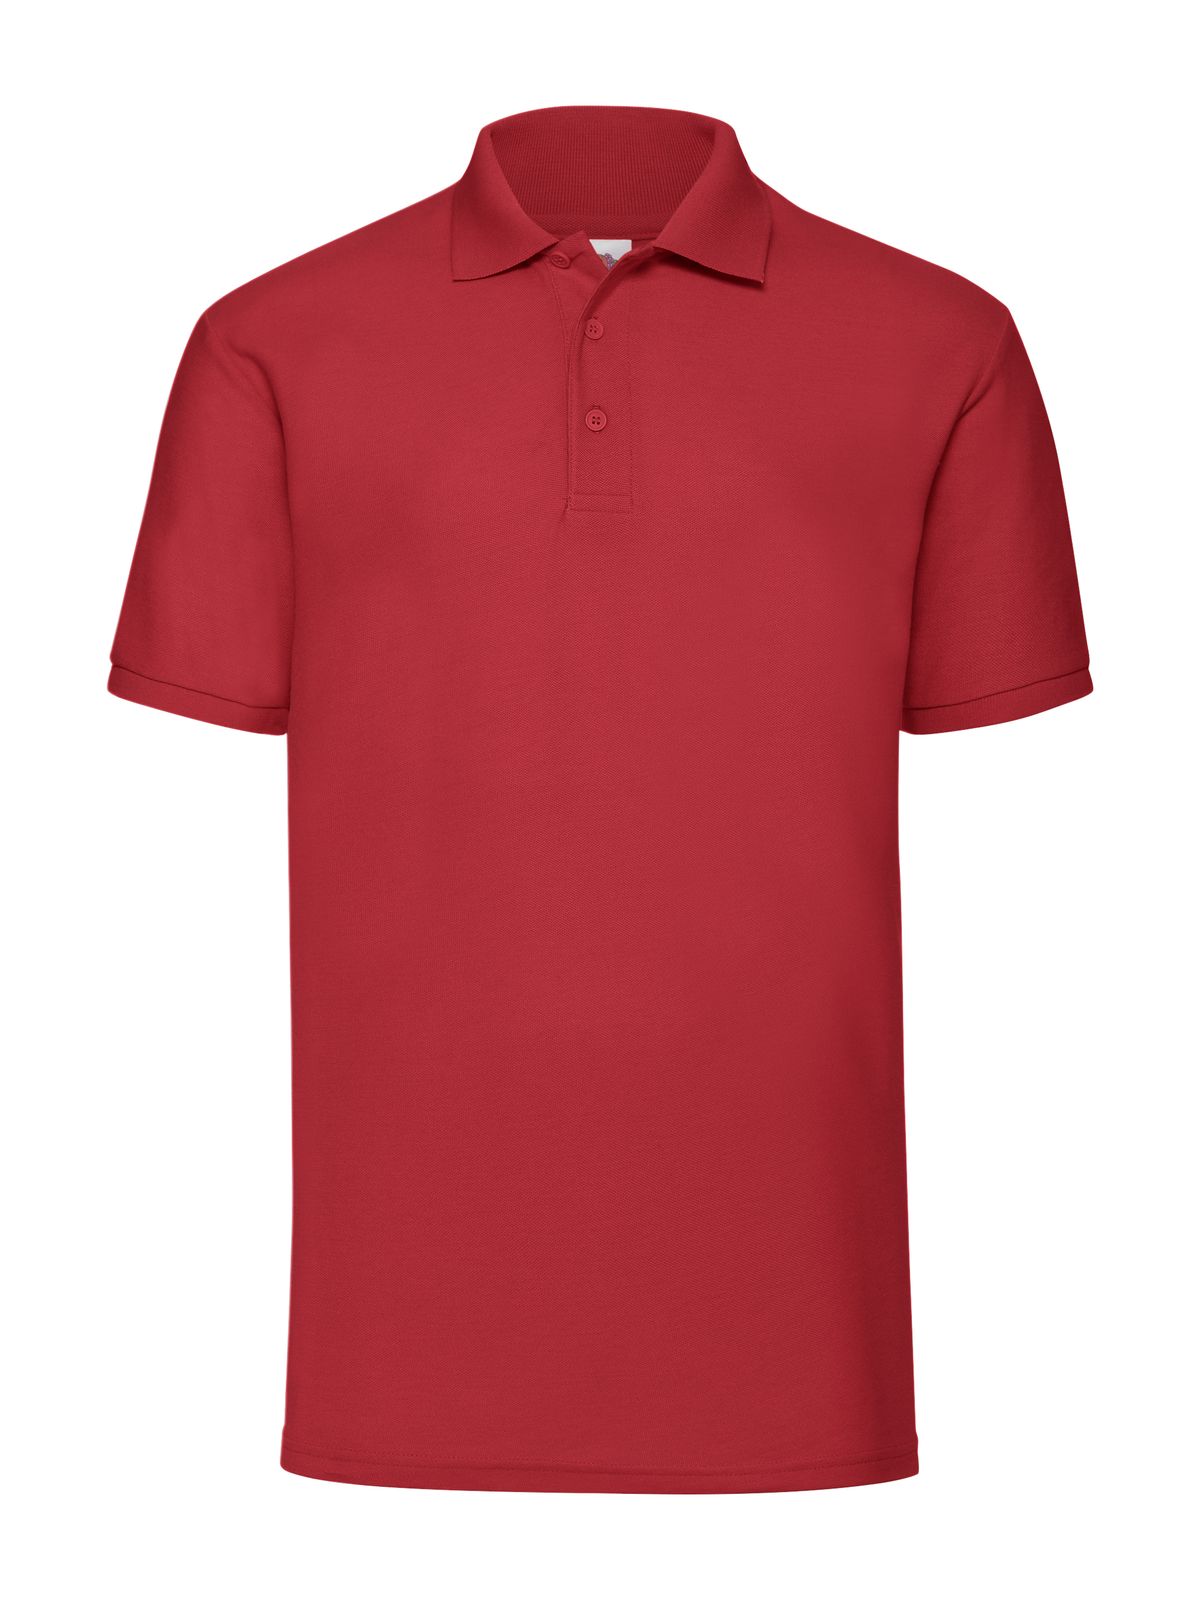 65-35-polo-red.webp